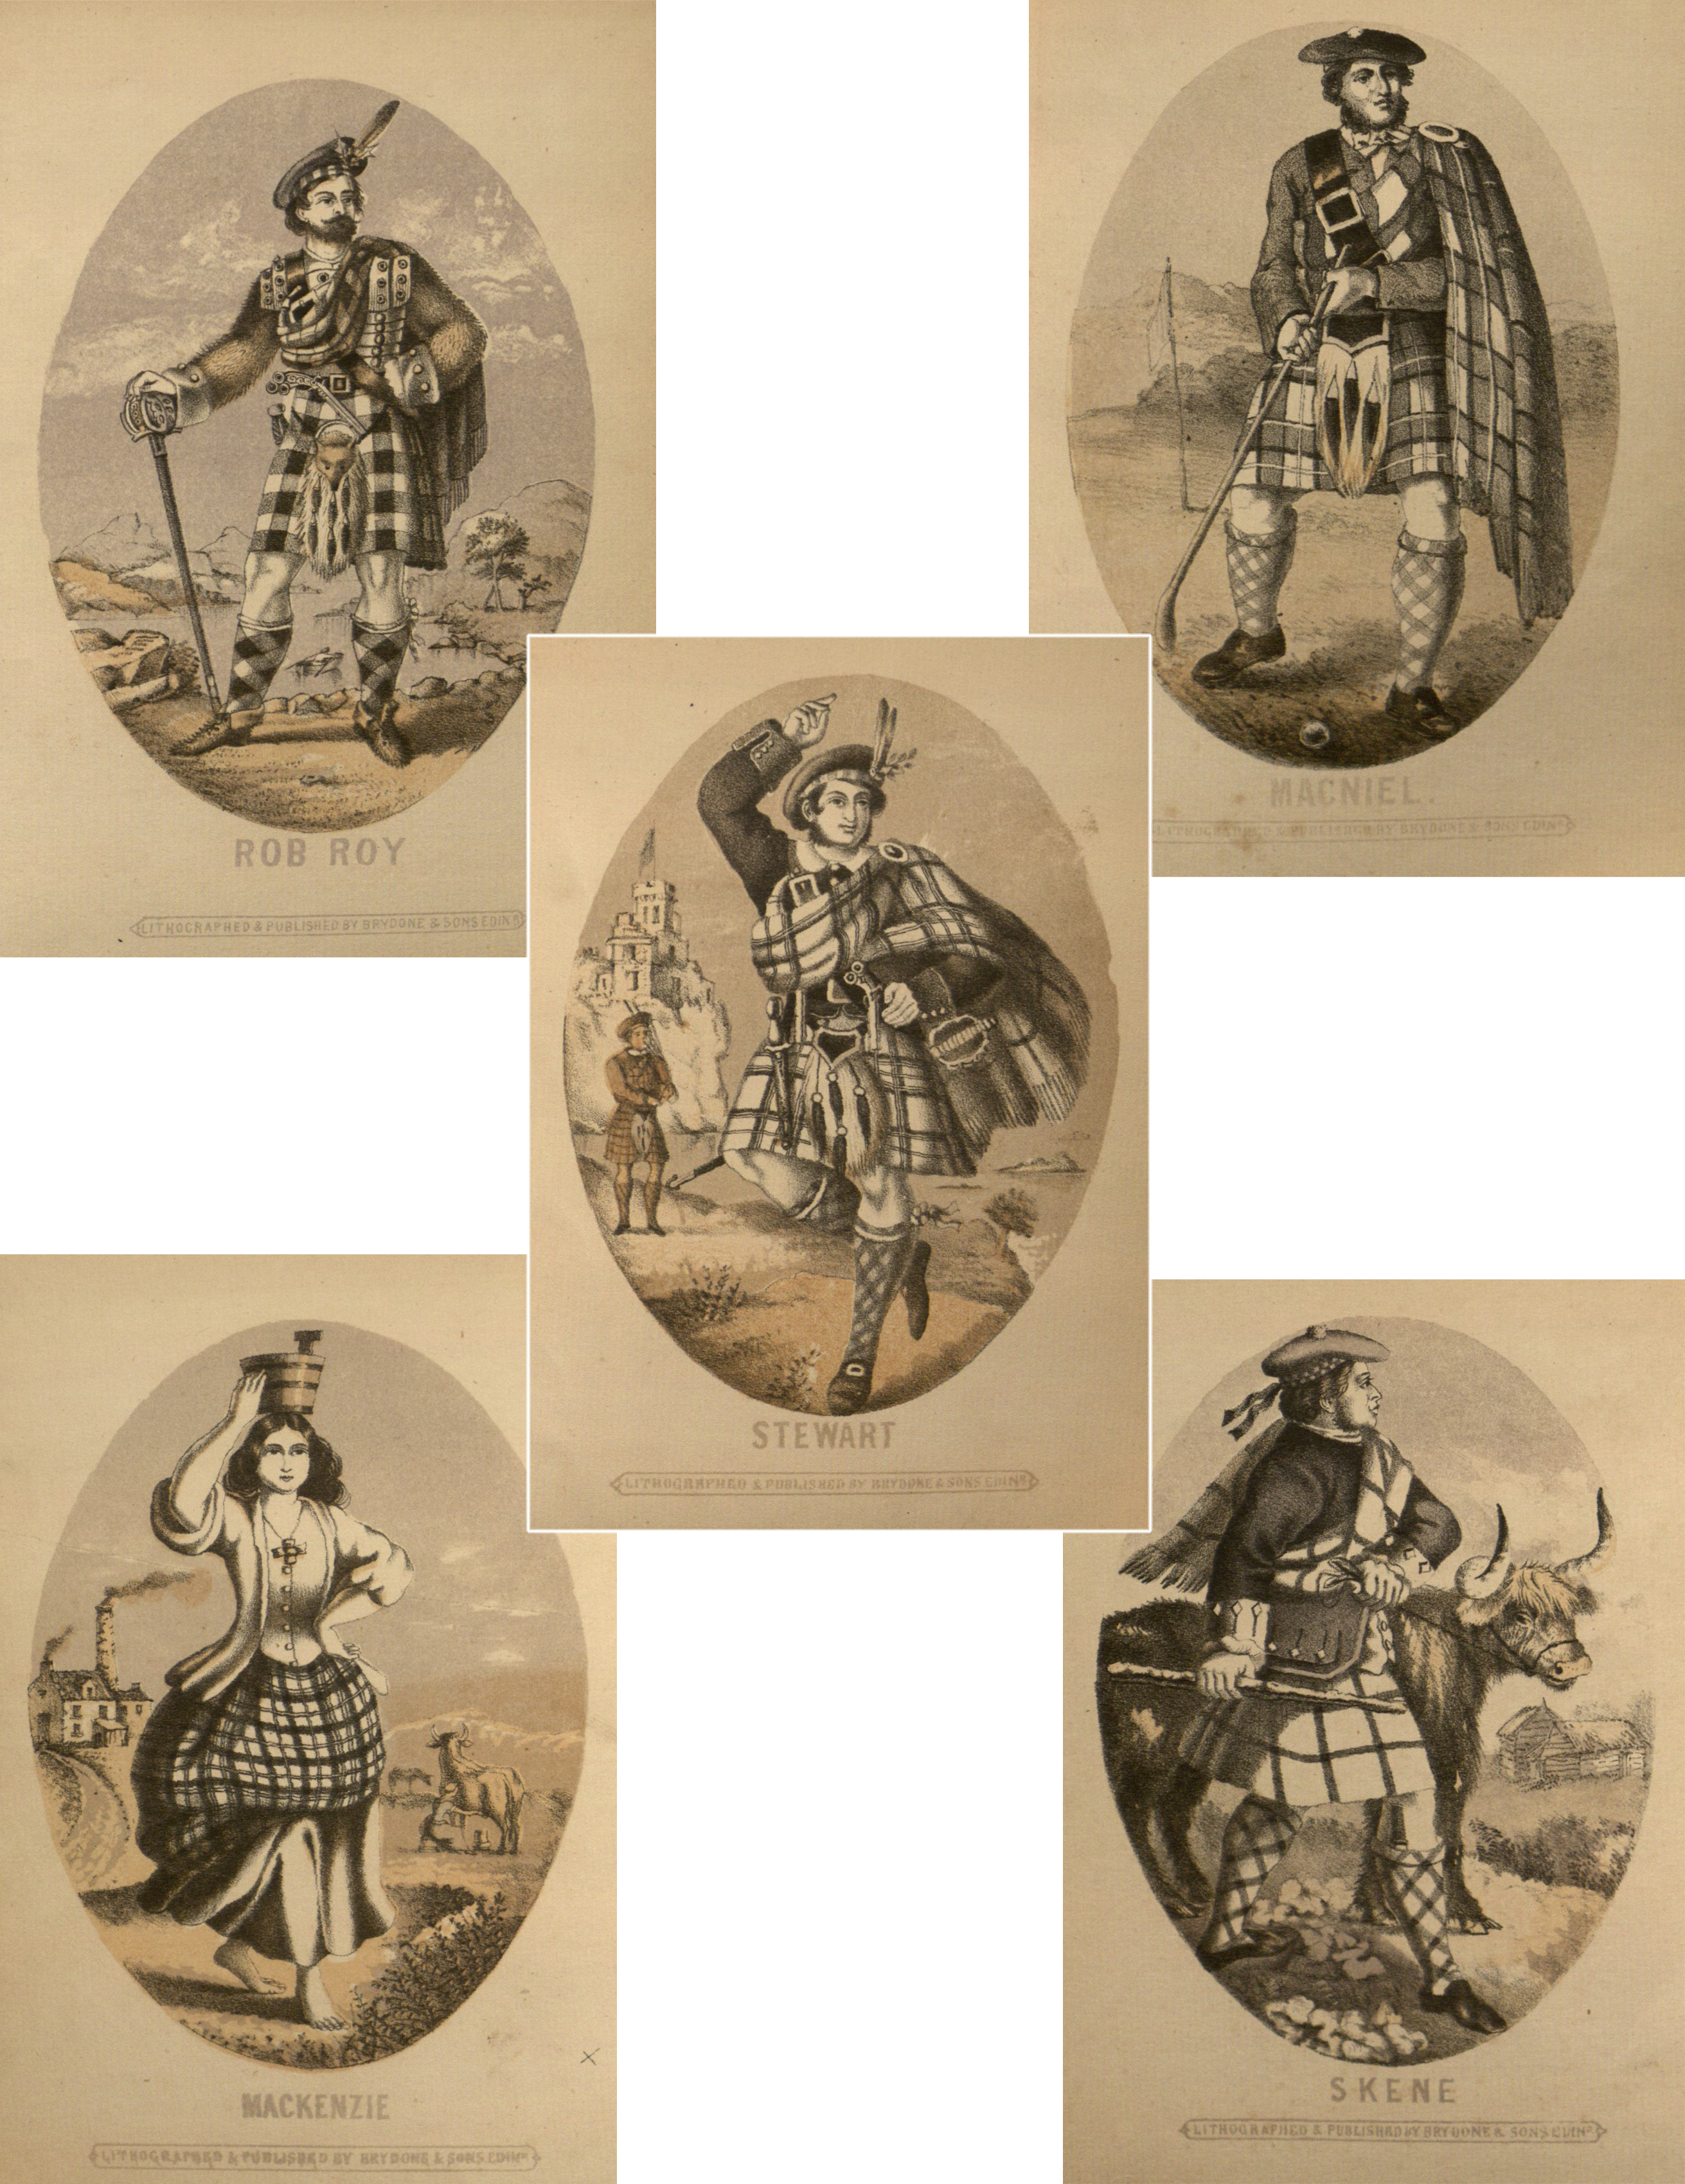 A selection of images from The Clans of the Highlands of Scotland(Edinburgh 1862). The formality of dress, the naive caricature, and the primitive nature of the drawing all add to the patronising air of bucolic simplicity which was typical of the 19th century promotion of highland society. (St Andrews copy Hen1.1.36)